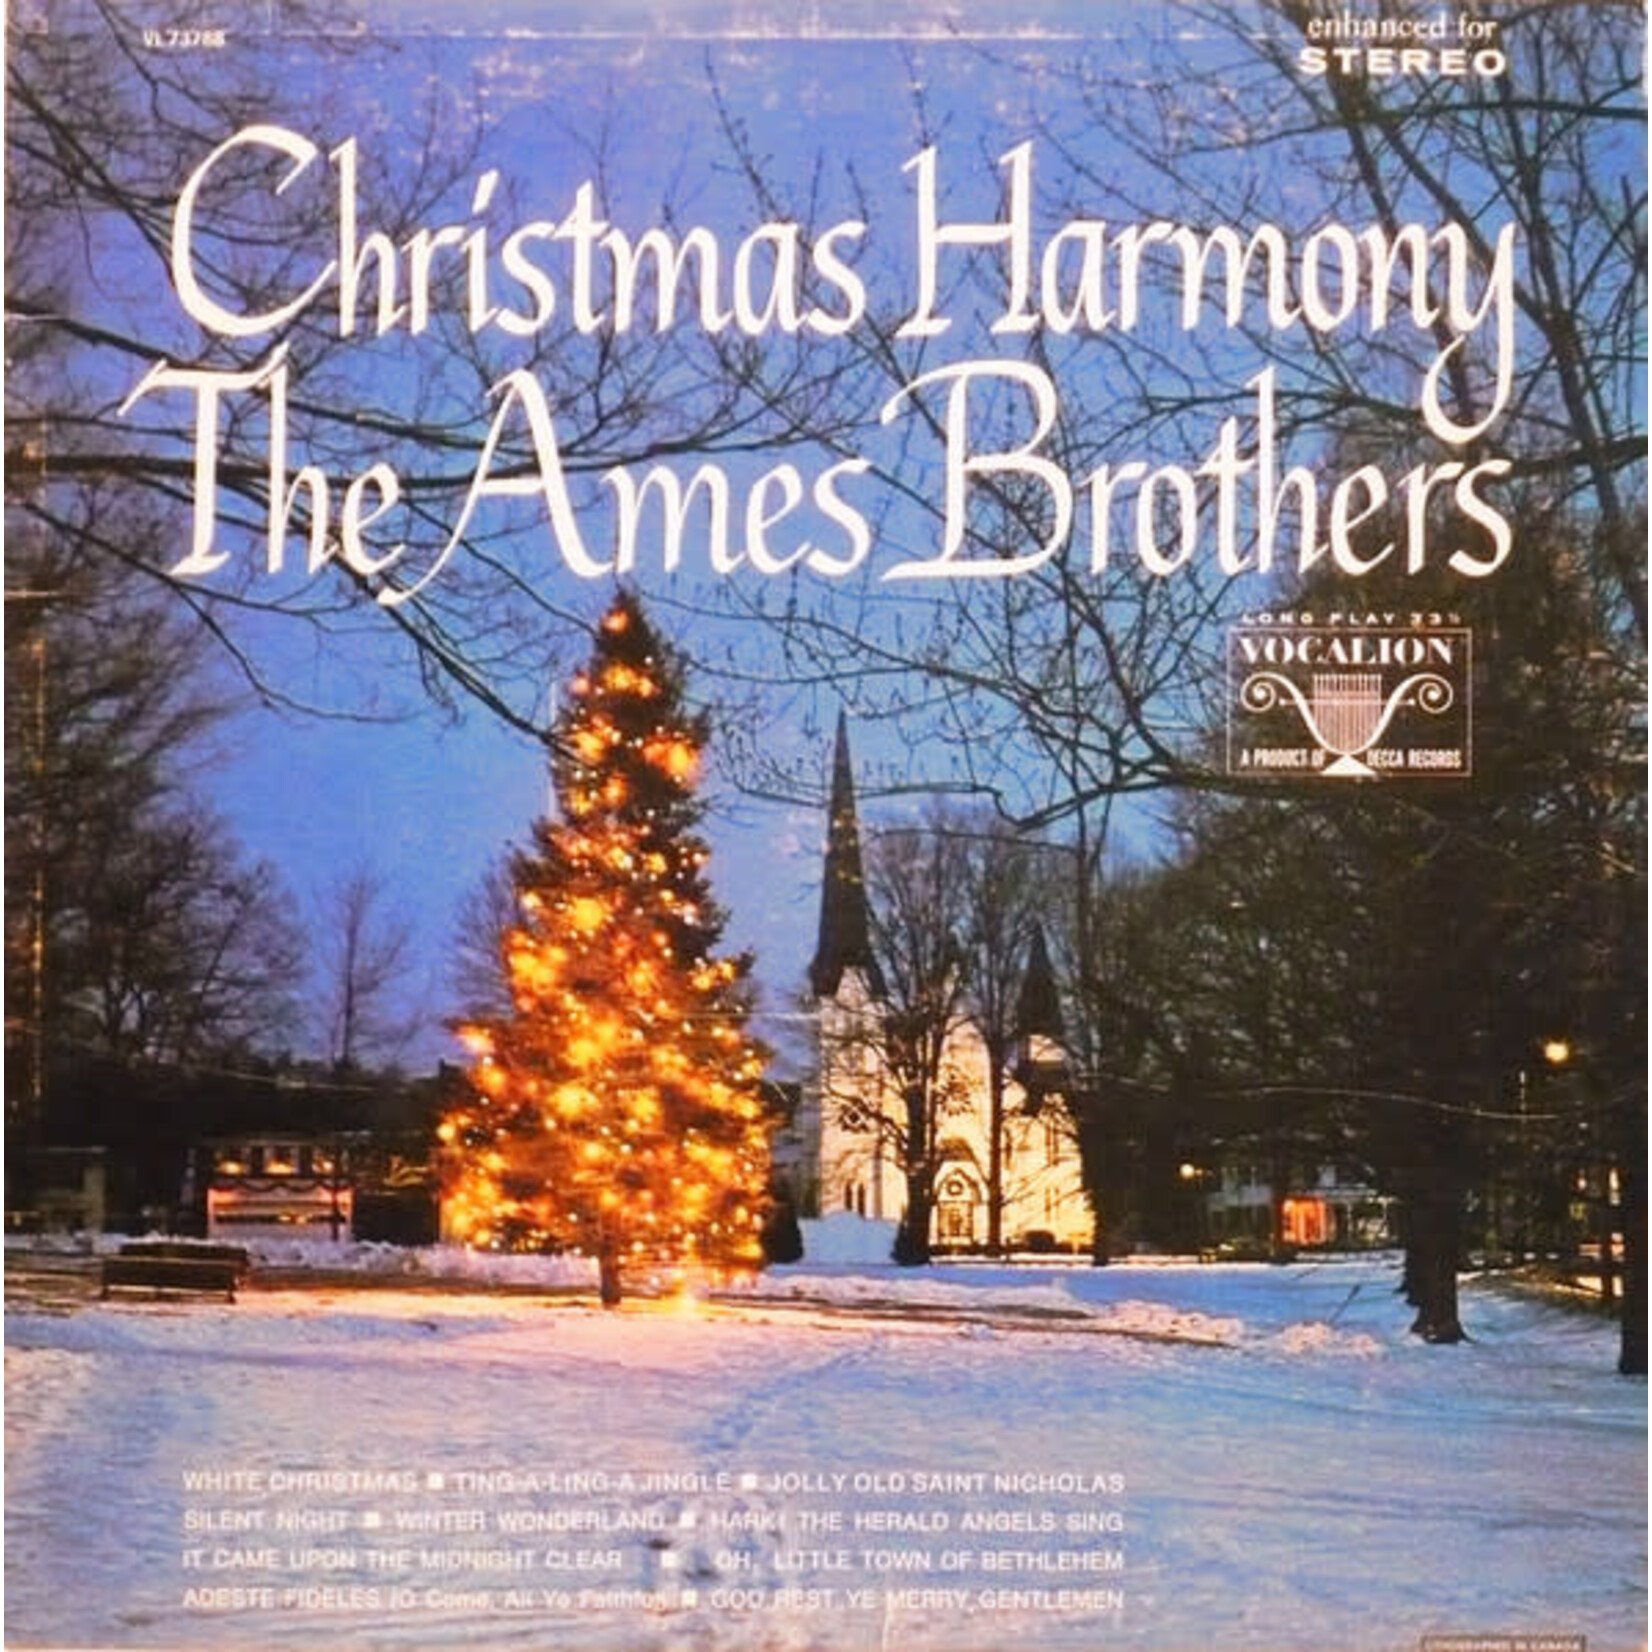 The Ames Brothers The Ames Brothers - Christmas Harmony (G, 1966, LP, Vocalion – VL 73788, Canada)